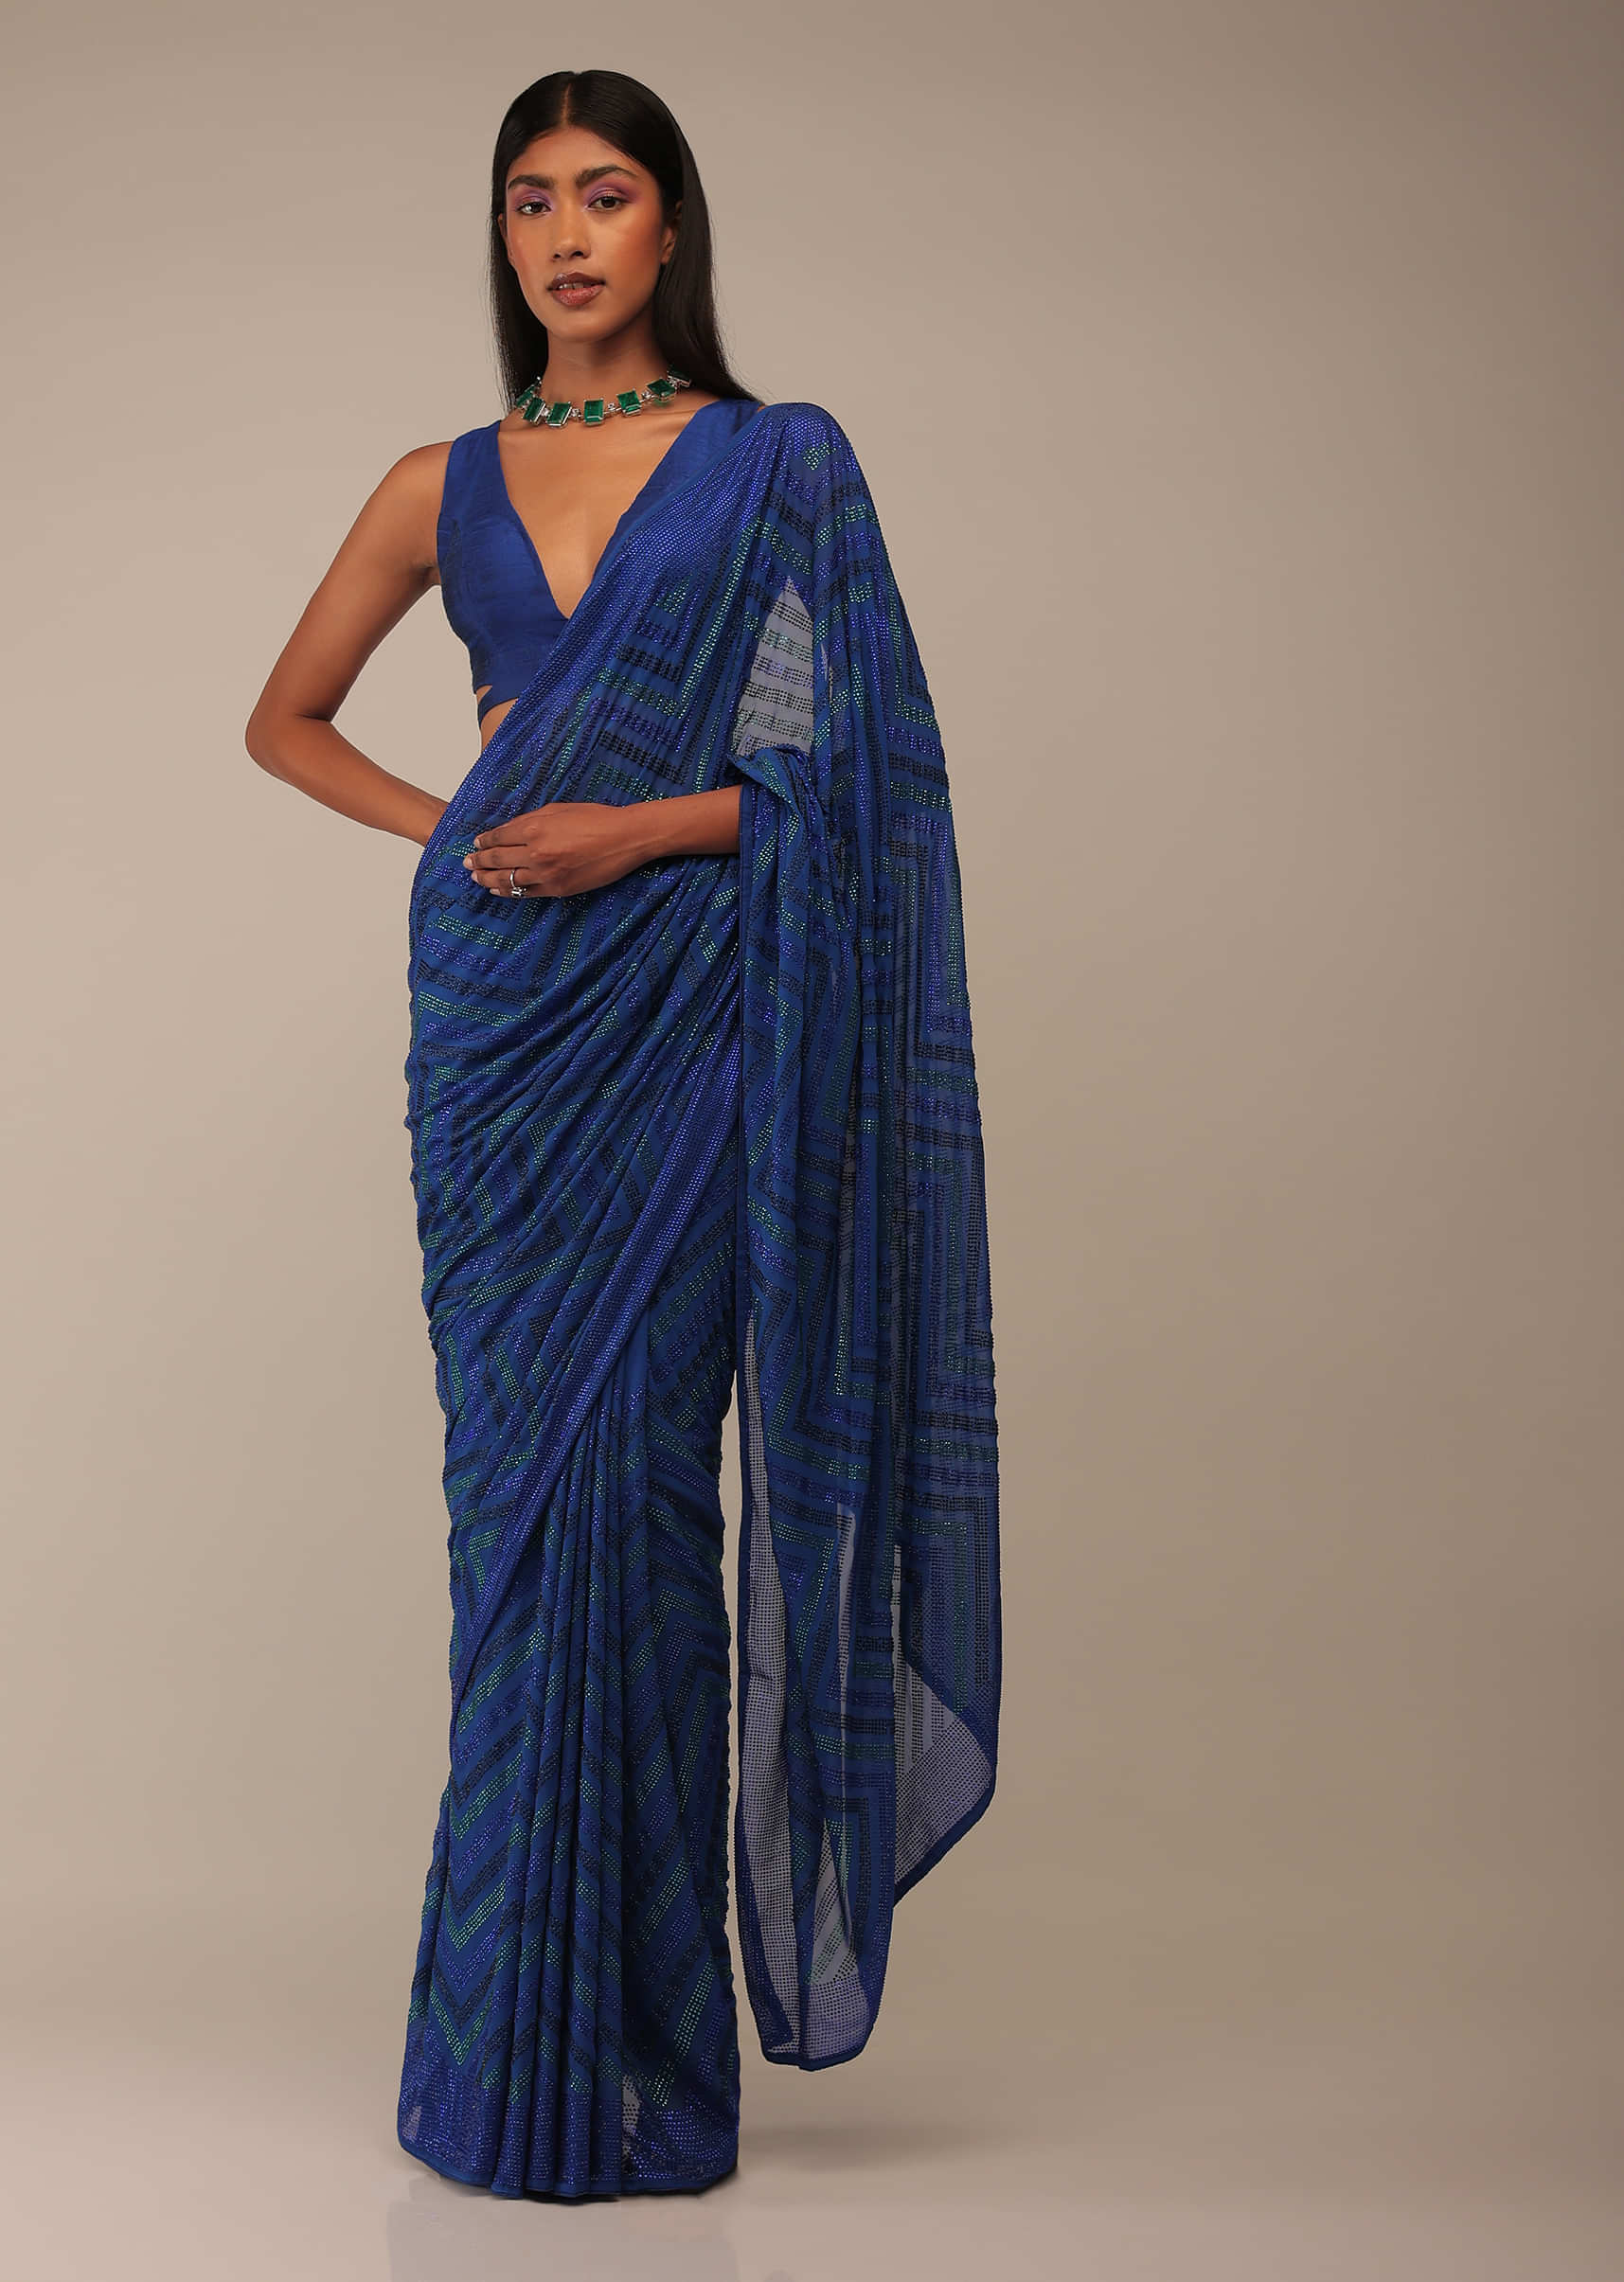 Nautical Blue Saree In Multi-Color Stones Embellishment, Crafted In Chiffon